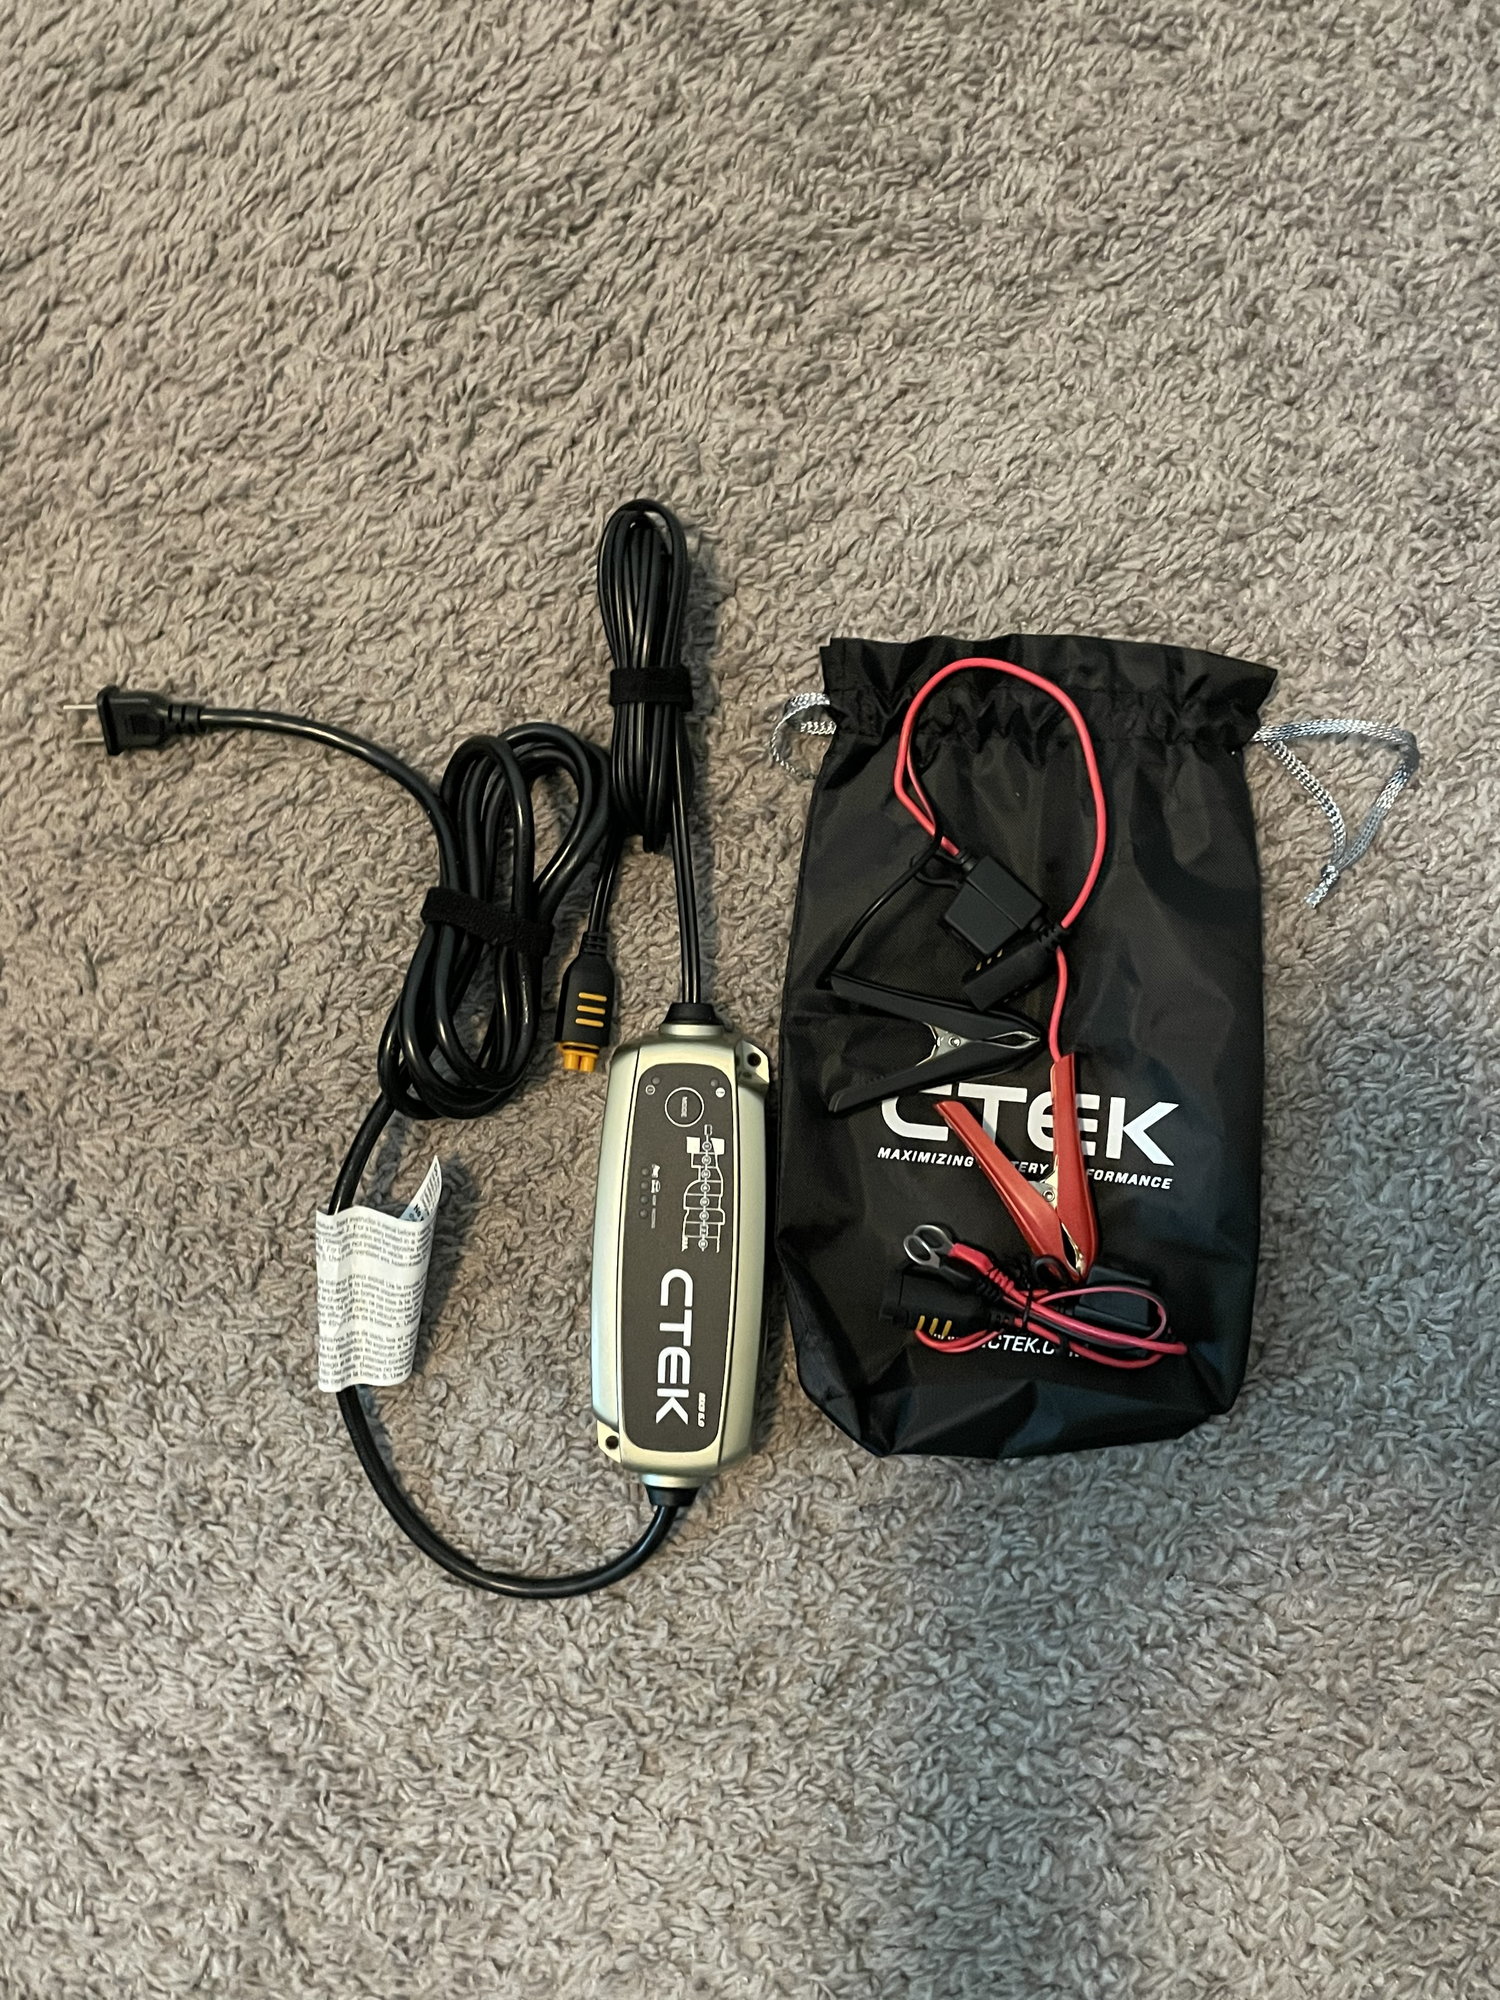 Miscellaneous - FS: CTEK 12V Battery Charger and Maintainer - Used - All Years Porsche All Models - Cedar Park, TX 78613, United States